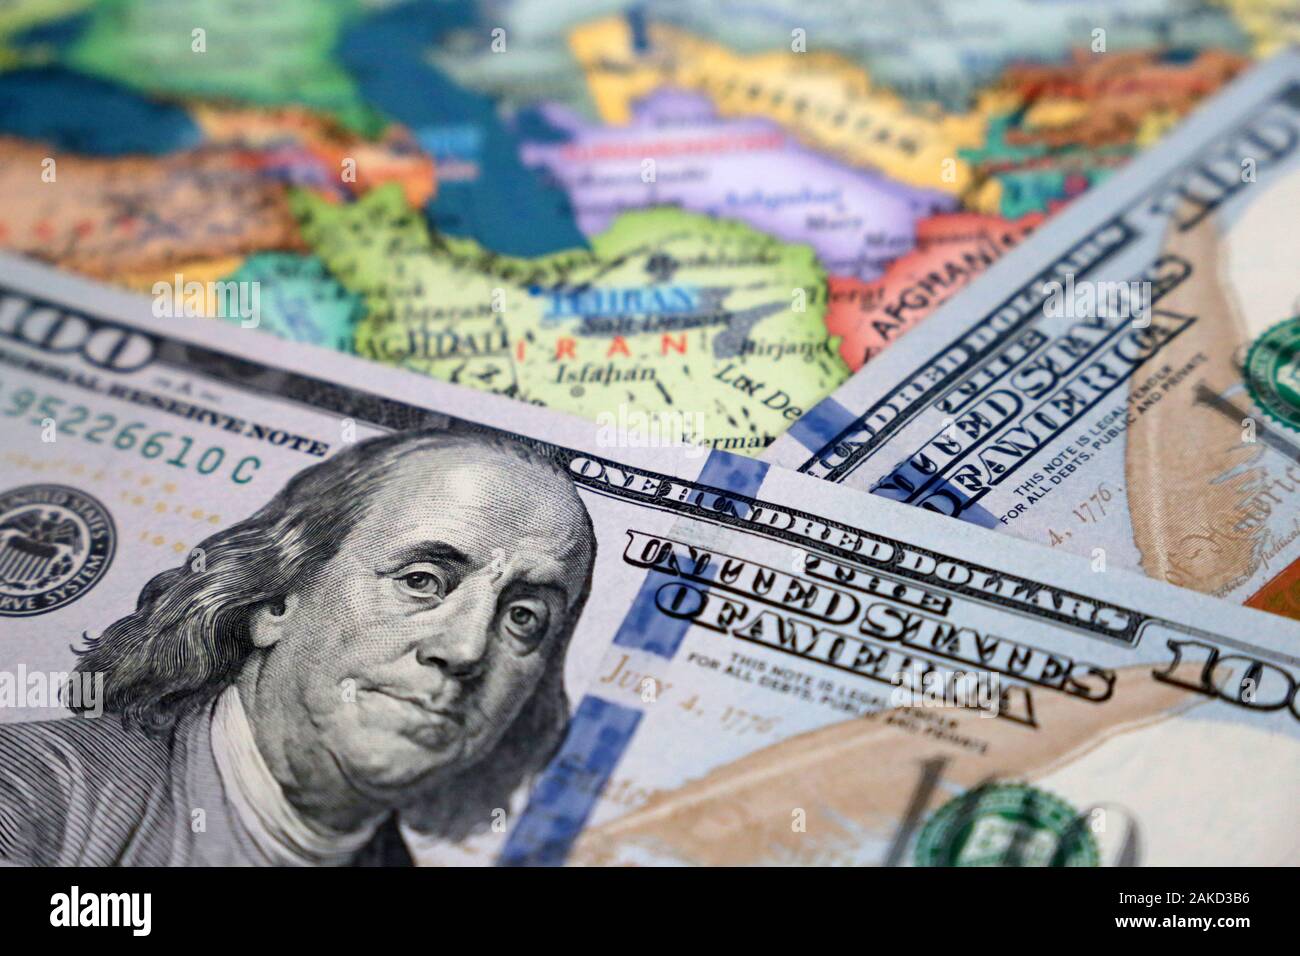 US dollars on the map of Iran and Iraq. Conflict between Washington and Tehran, trading in middle East, oil industry Stock Photo